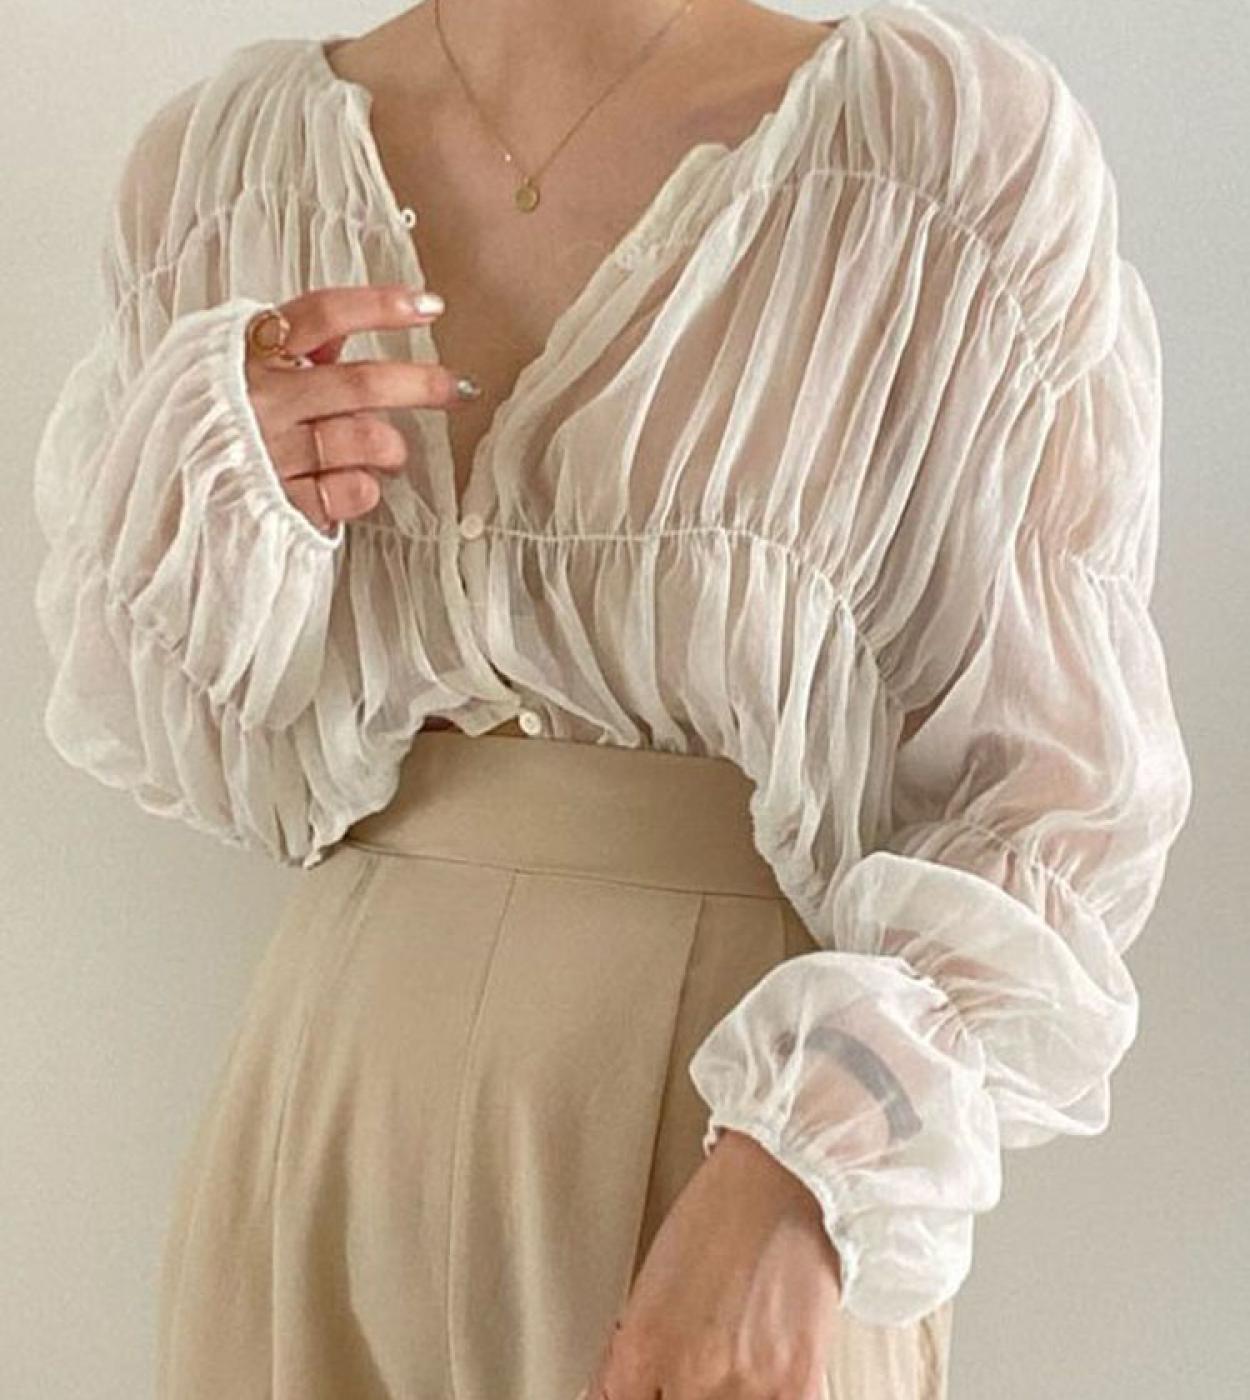  Fashion Pleated Casual Blouse Women Summer New Loose Folds Perspective Chiffon Shirt Long Sleeve Tops Blusas Mujer 1562